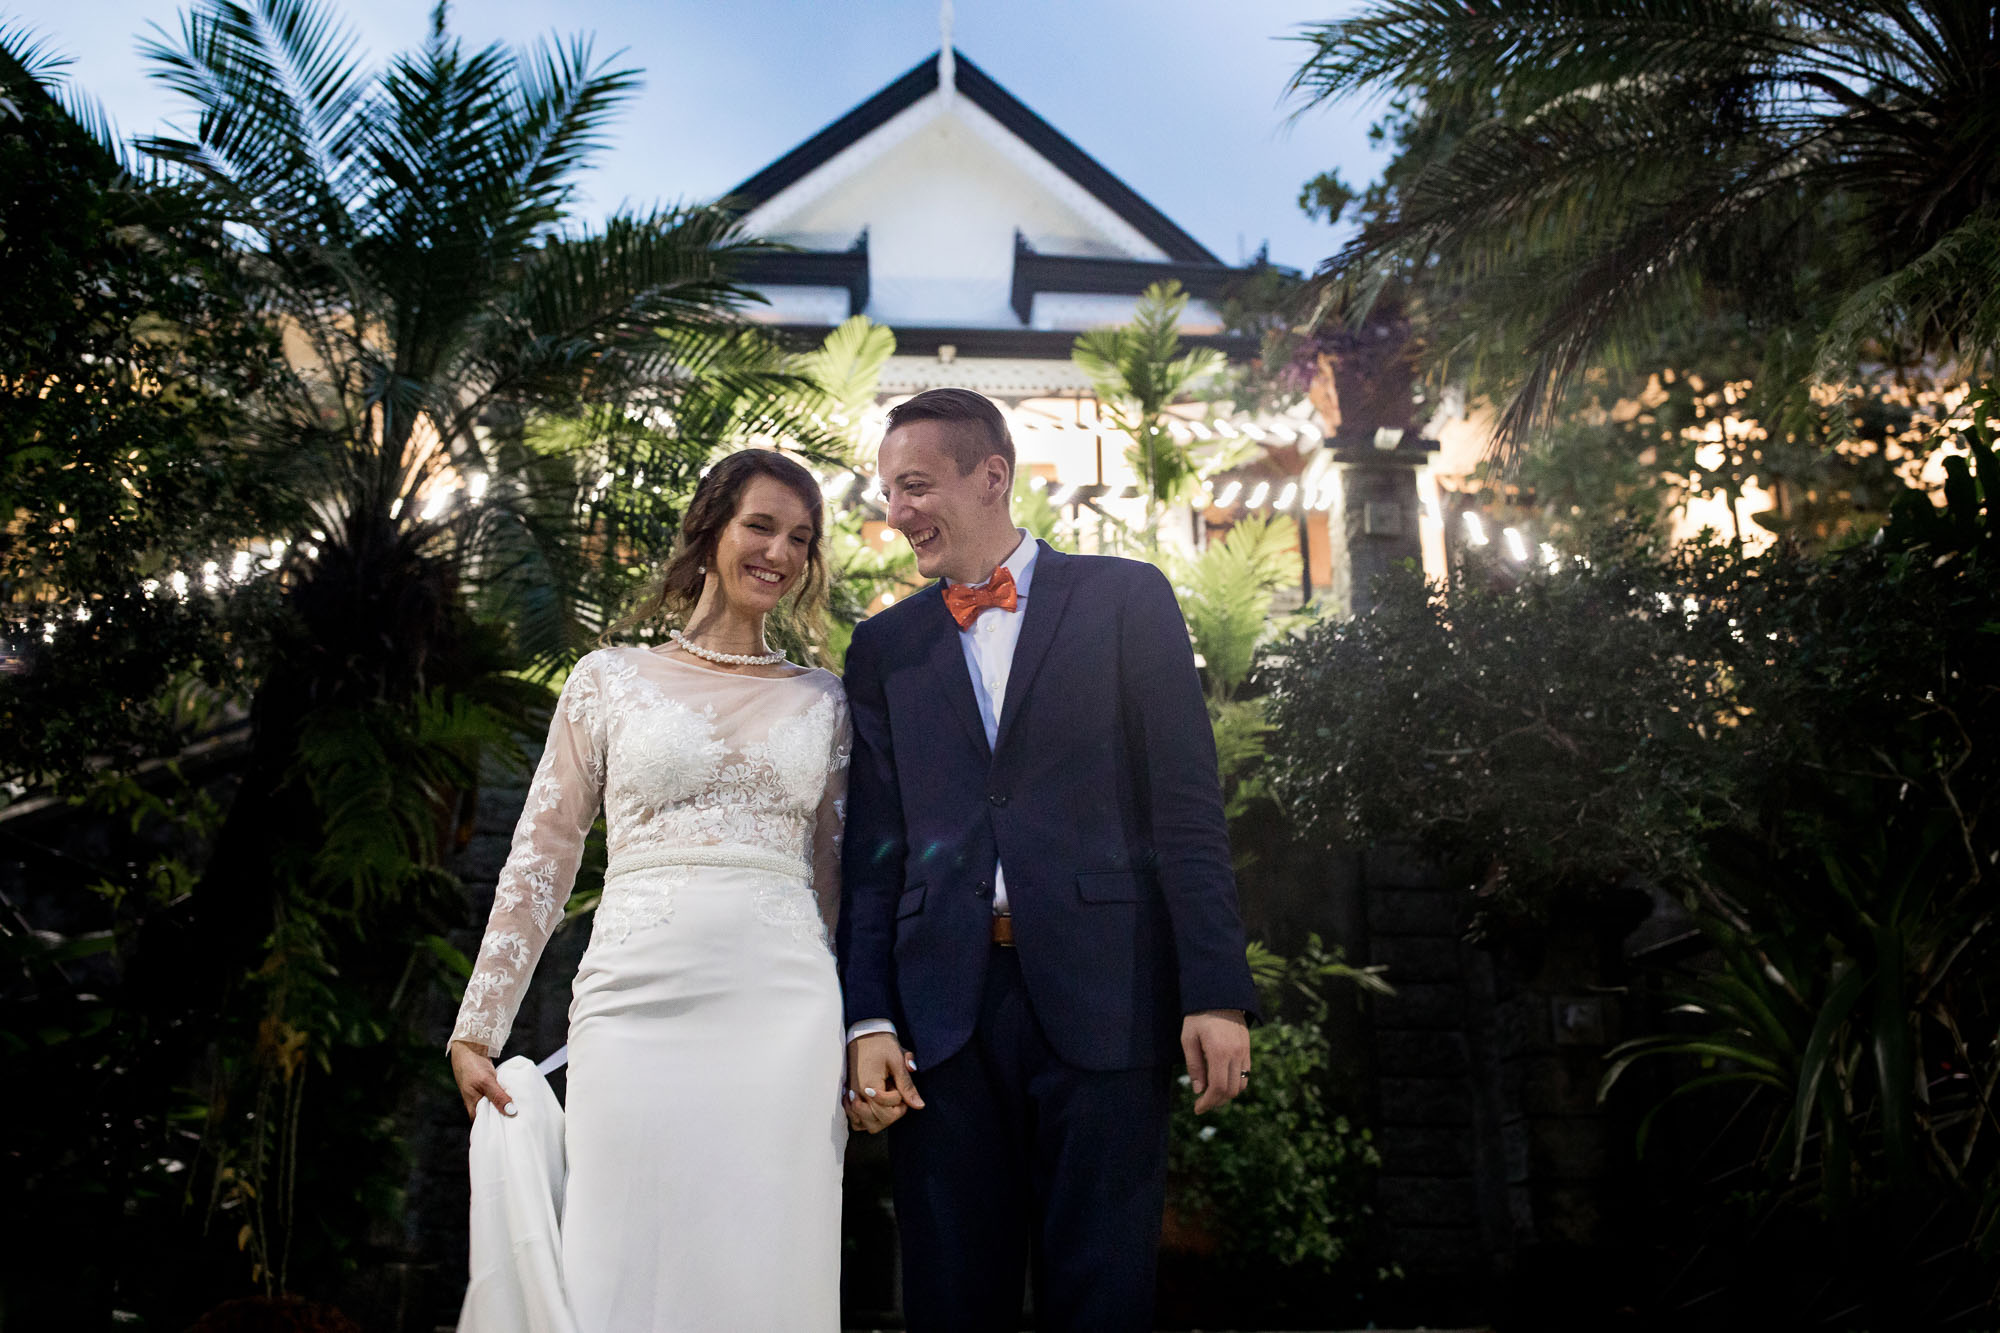 Bridal portraits in one of the best places to elope in the world